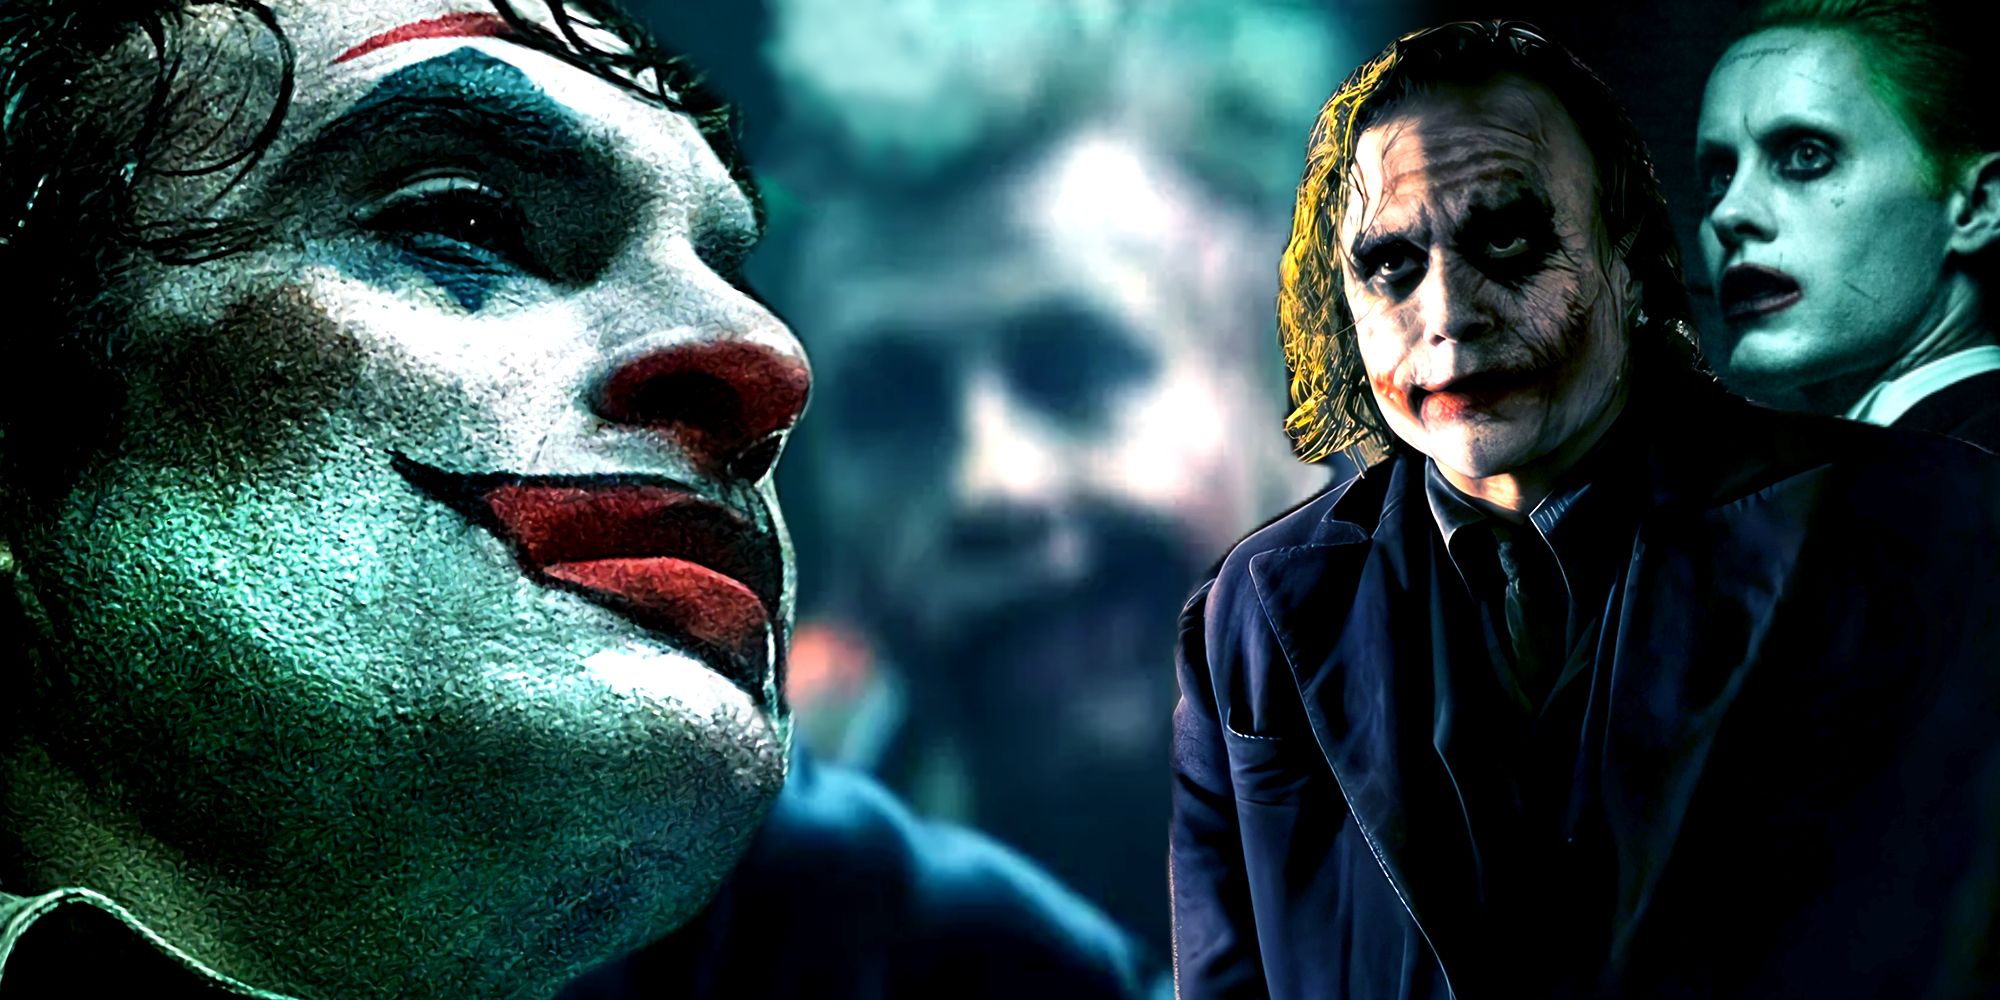 Joker Actors in Live-Action Movies Joaquin Phoenix, Heath Ledger, Barry Keoghan, and Jared Leto